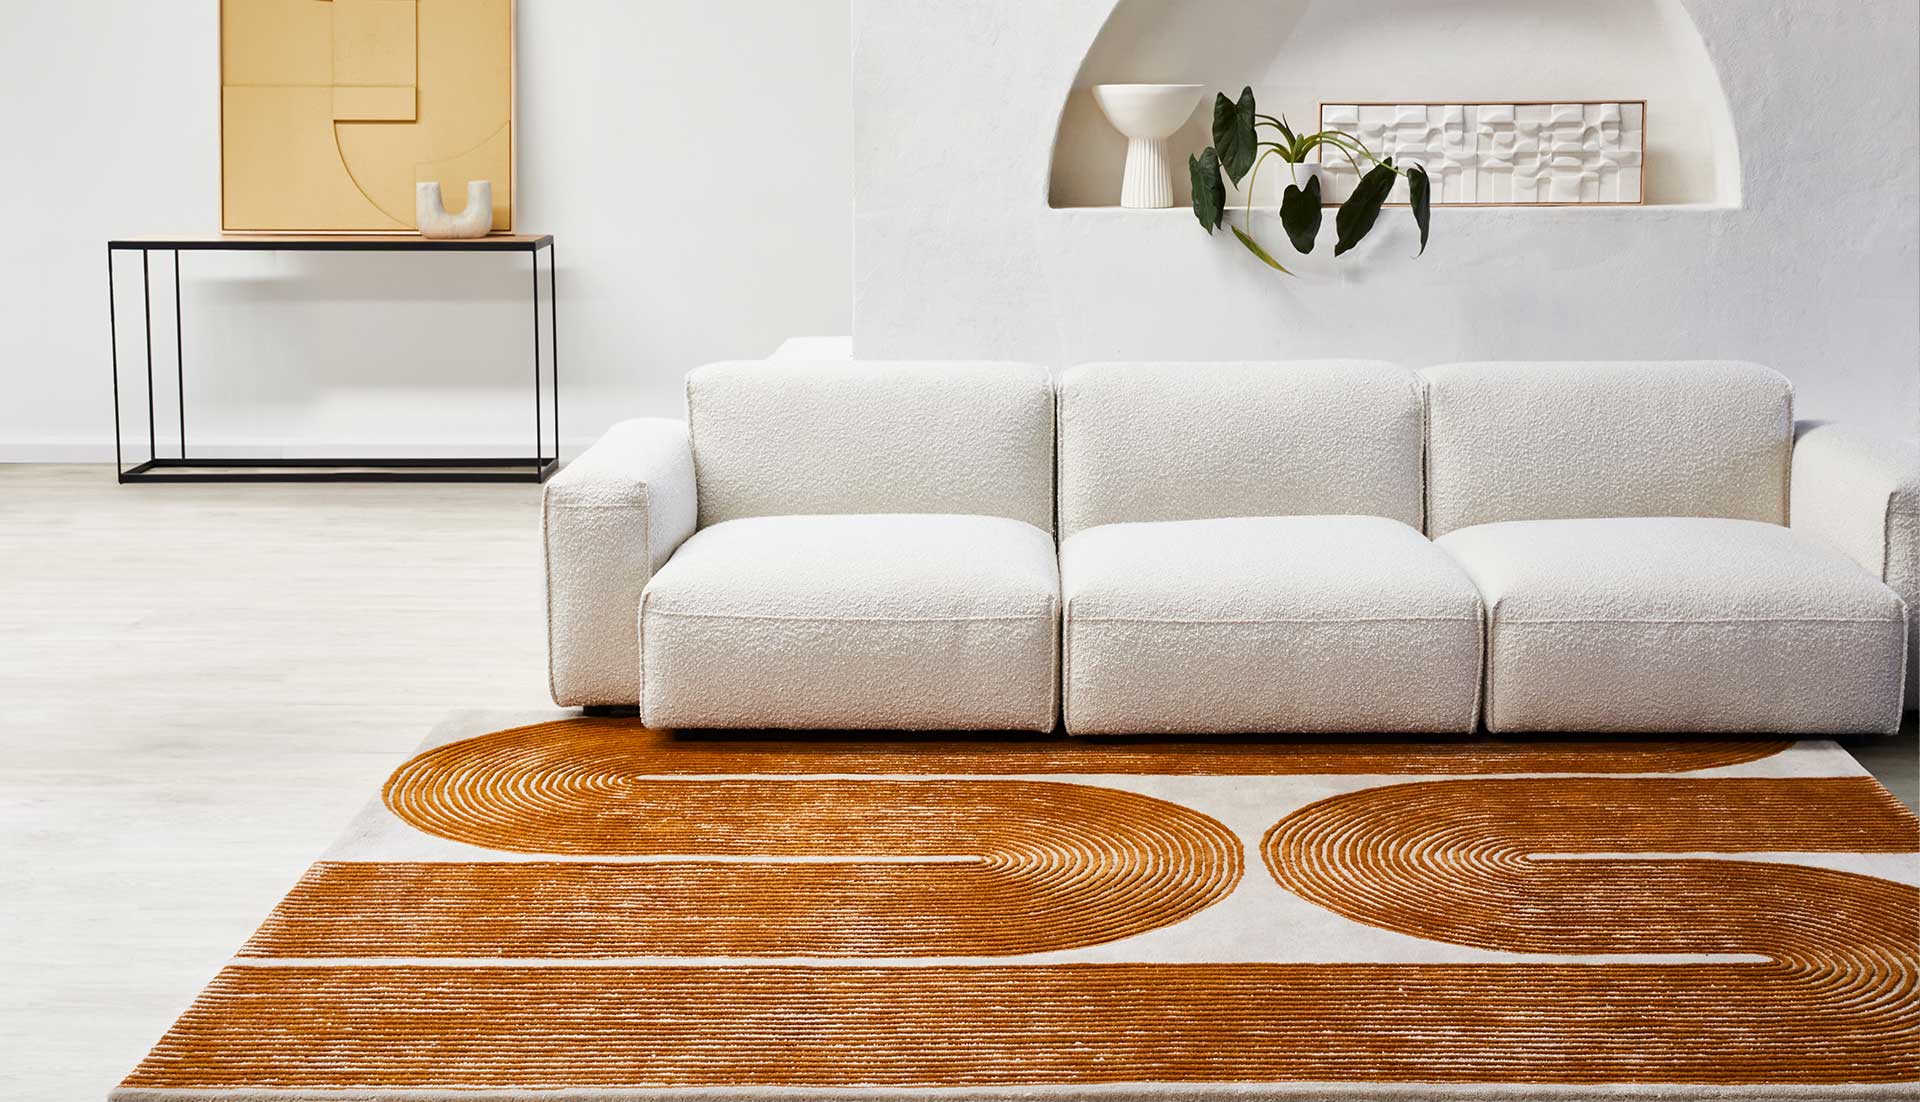 new arrivals to the rug collection and tallira furniture